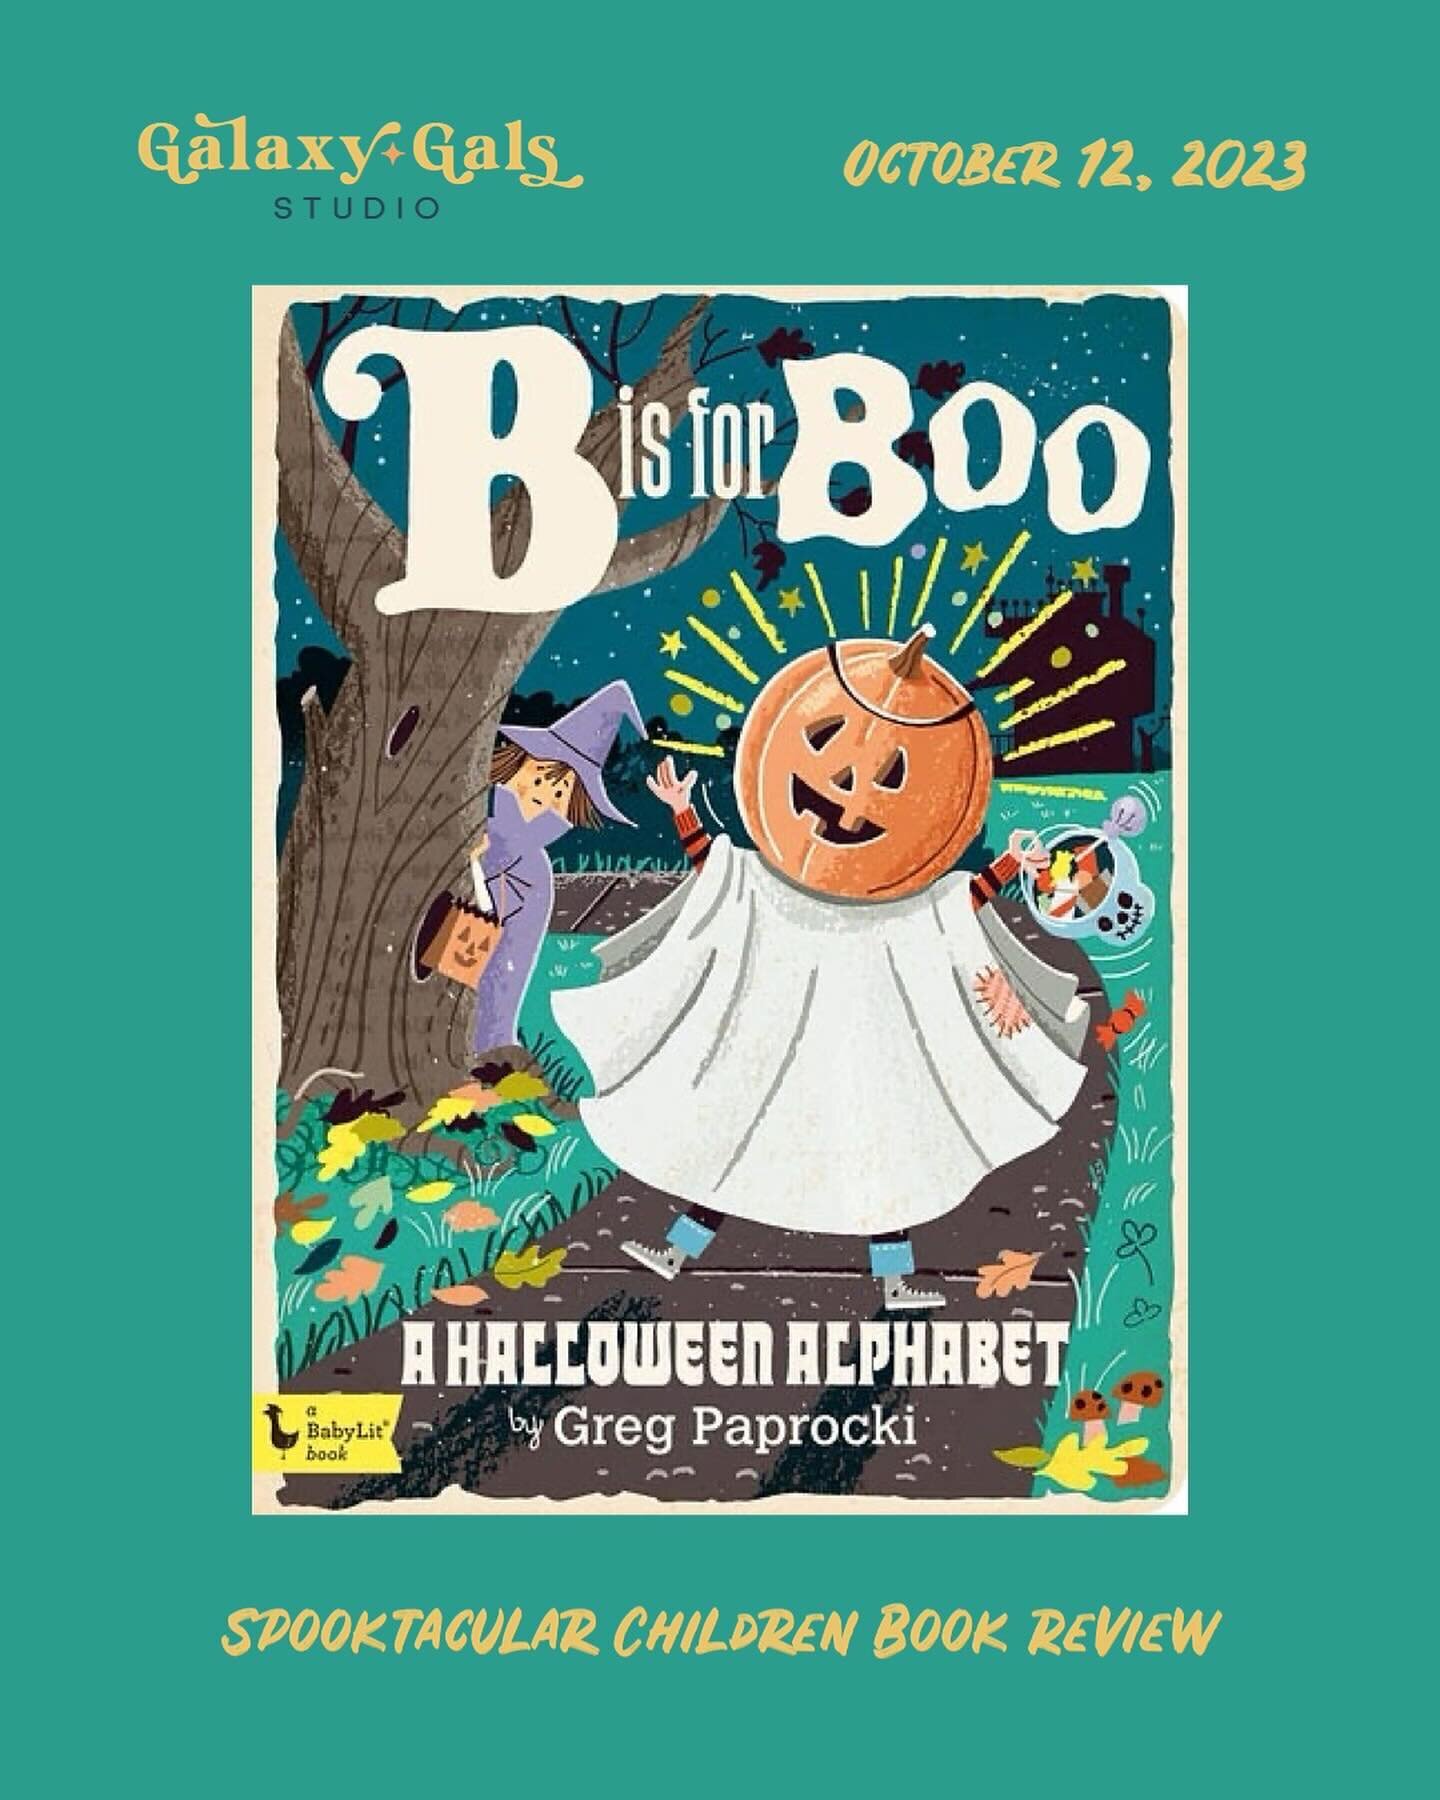 For the full review of B is for Boo, A Halloween Alphabet by Greg Paprocki, visit our newsletter link in our bio. 

Welcome to our Spooktacular Reads! We are celebrating my favorite holiday by reviewing Halloween and other spooky/fall-themed children